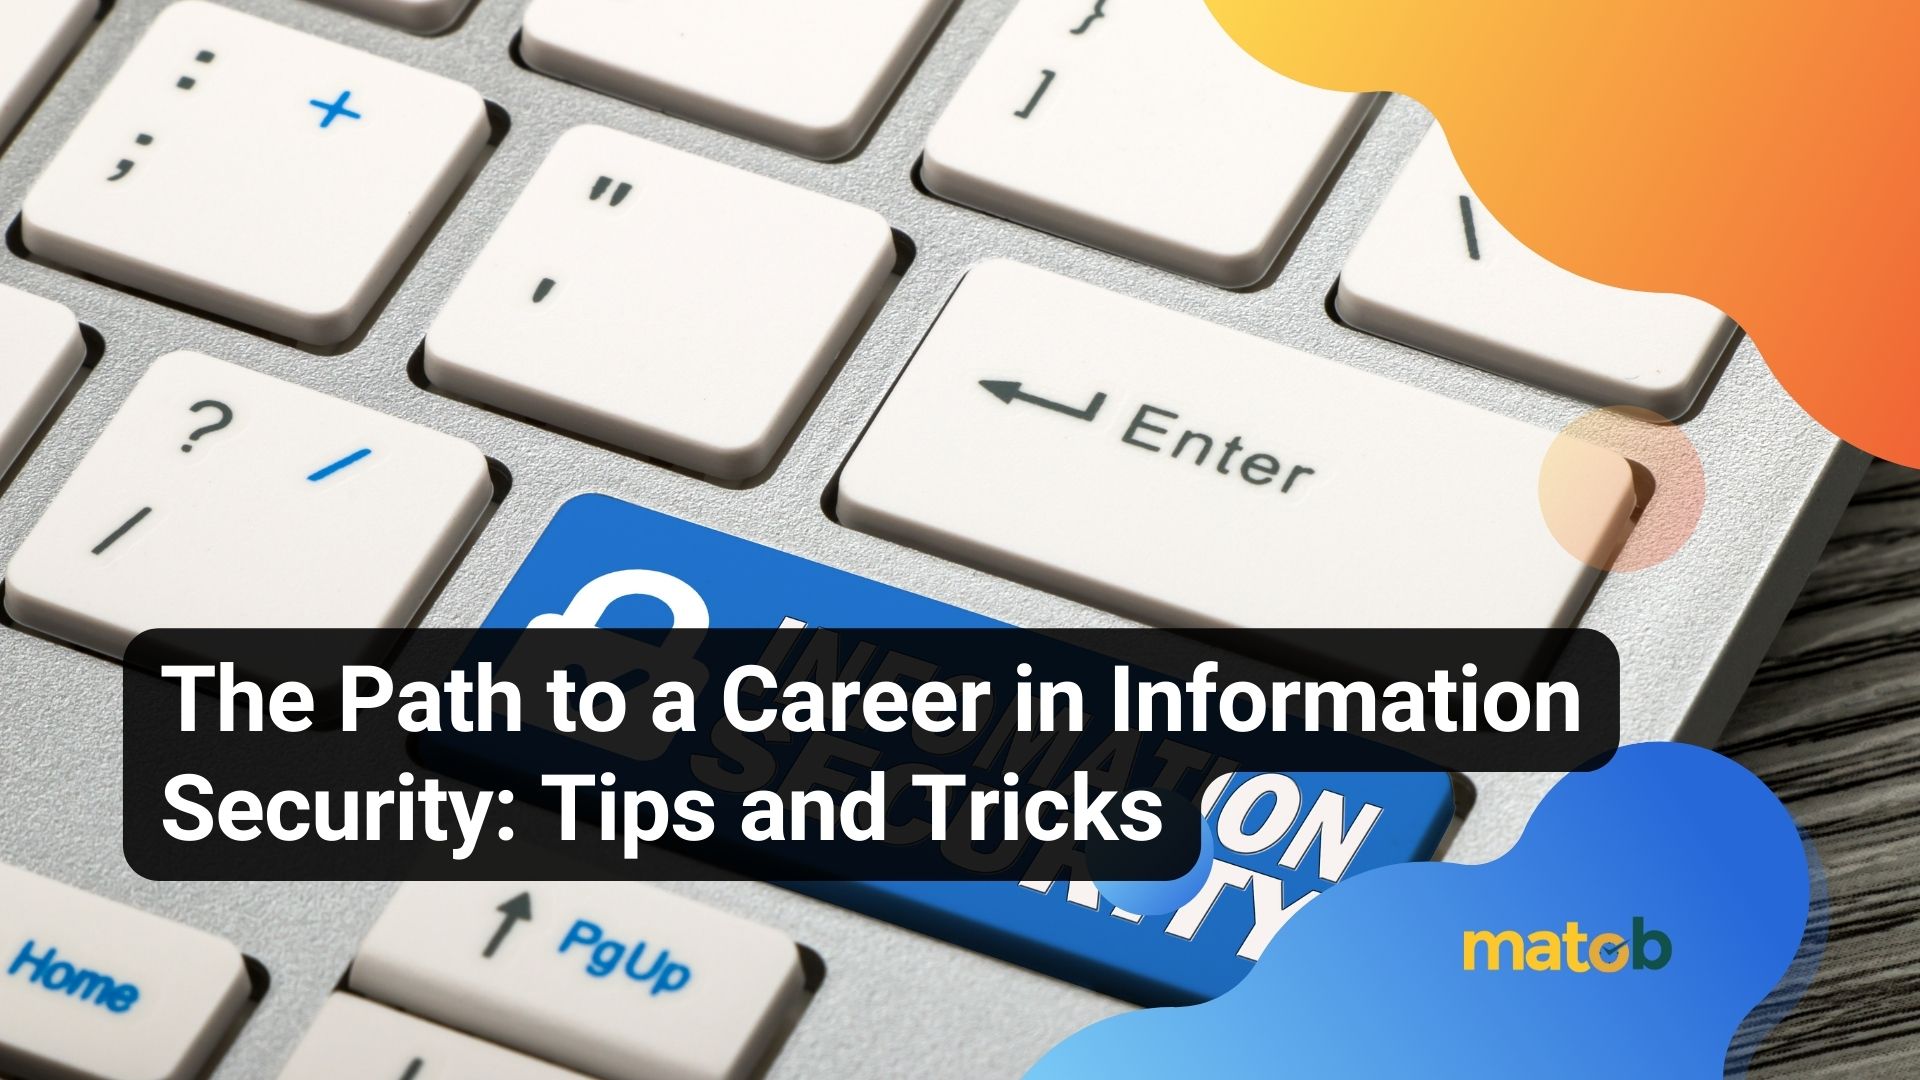 The Path to a Career in Information Security: Tips and Tricks